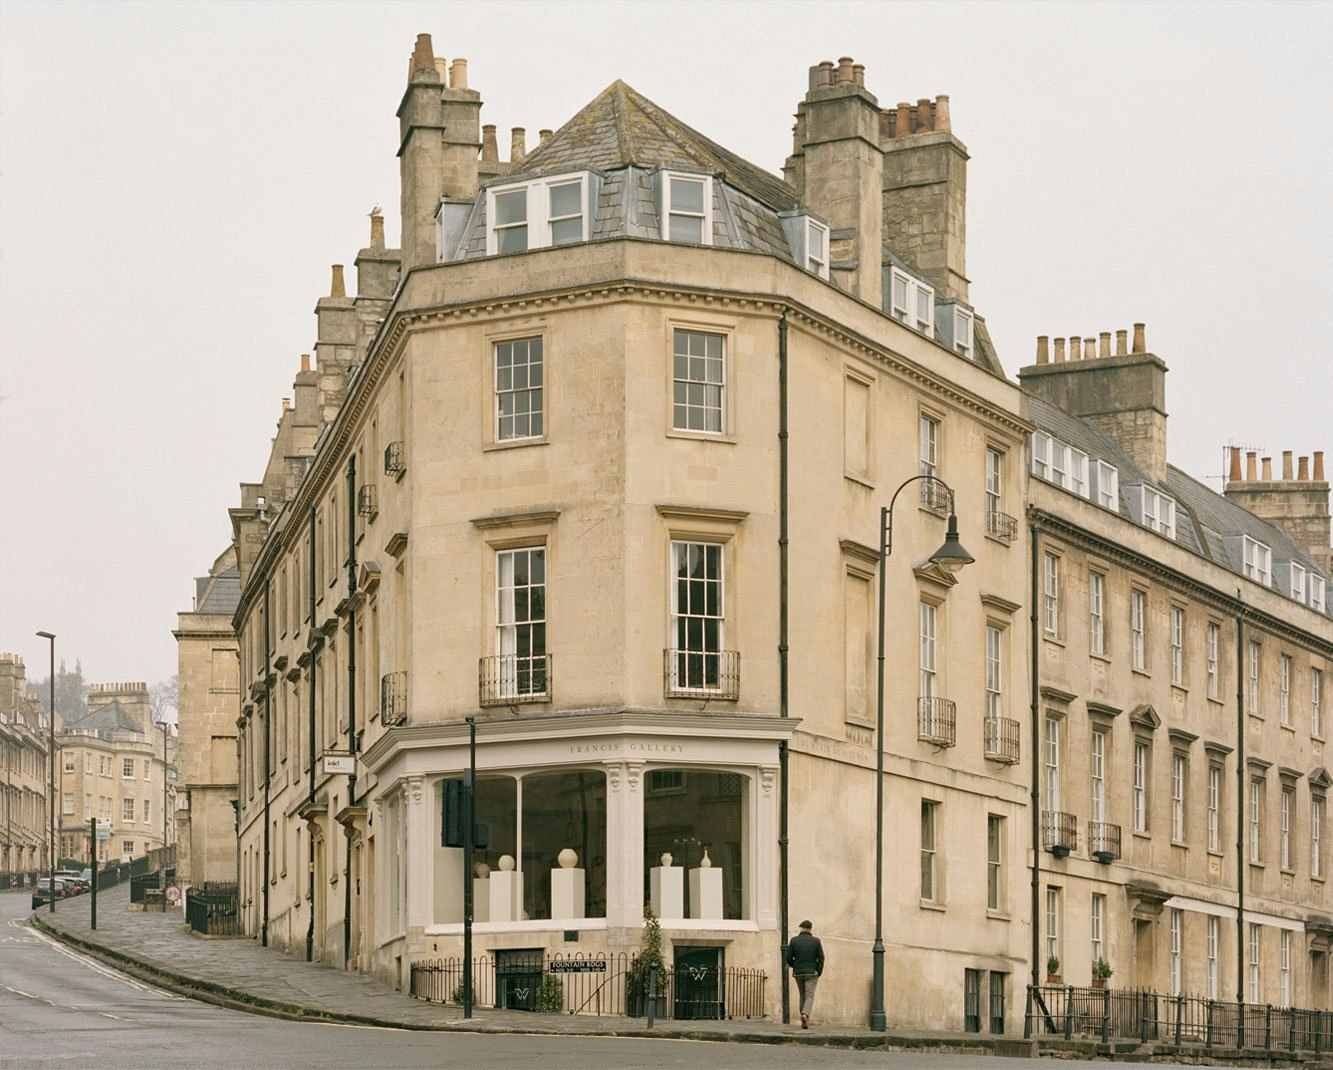 The unassuming exterior of the Francis Gallery, Bath, located in a traditional sandstone building.